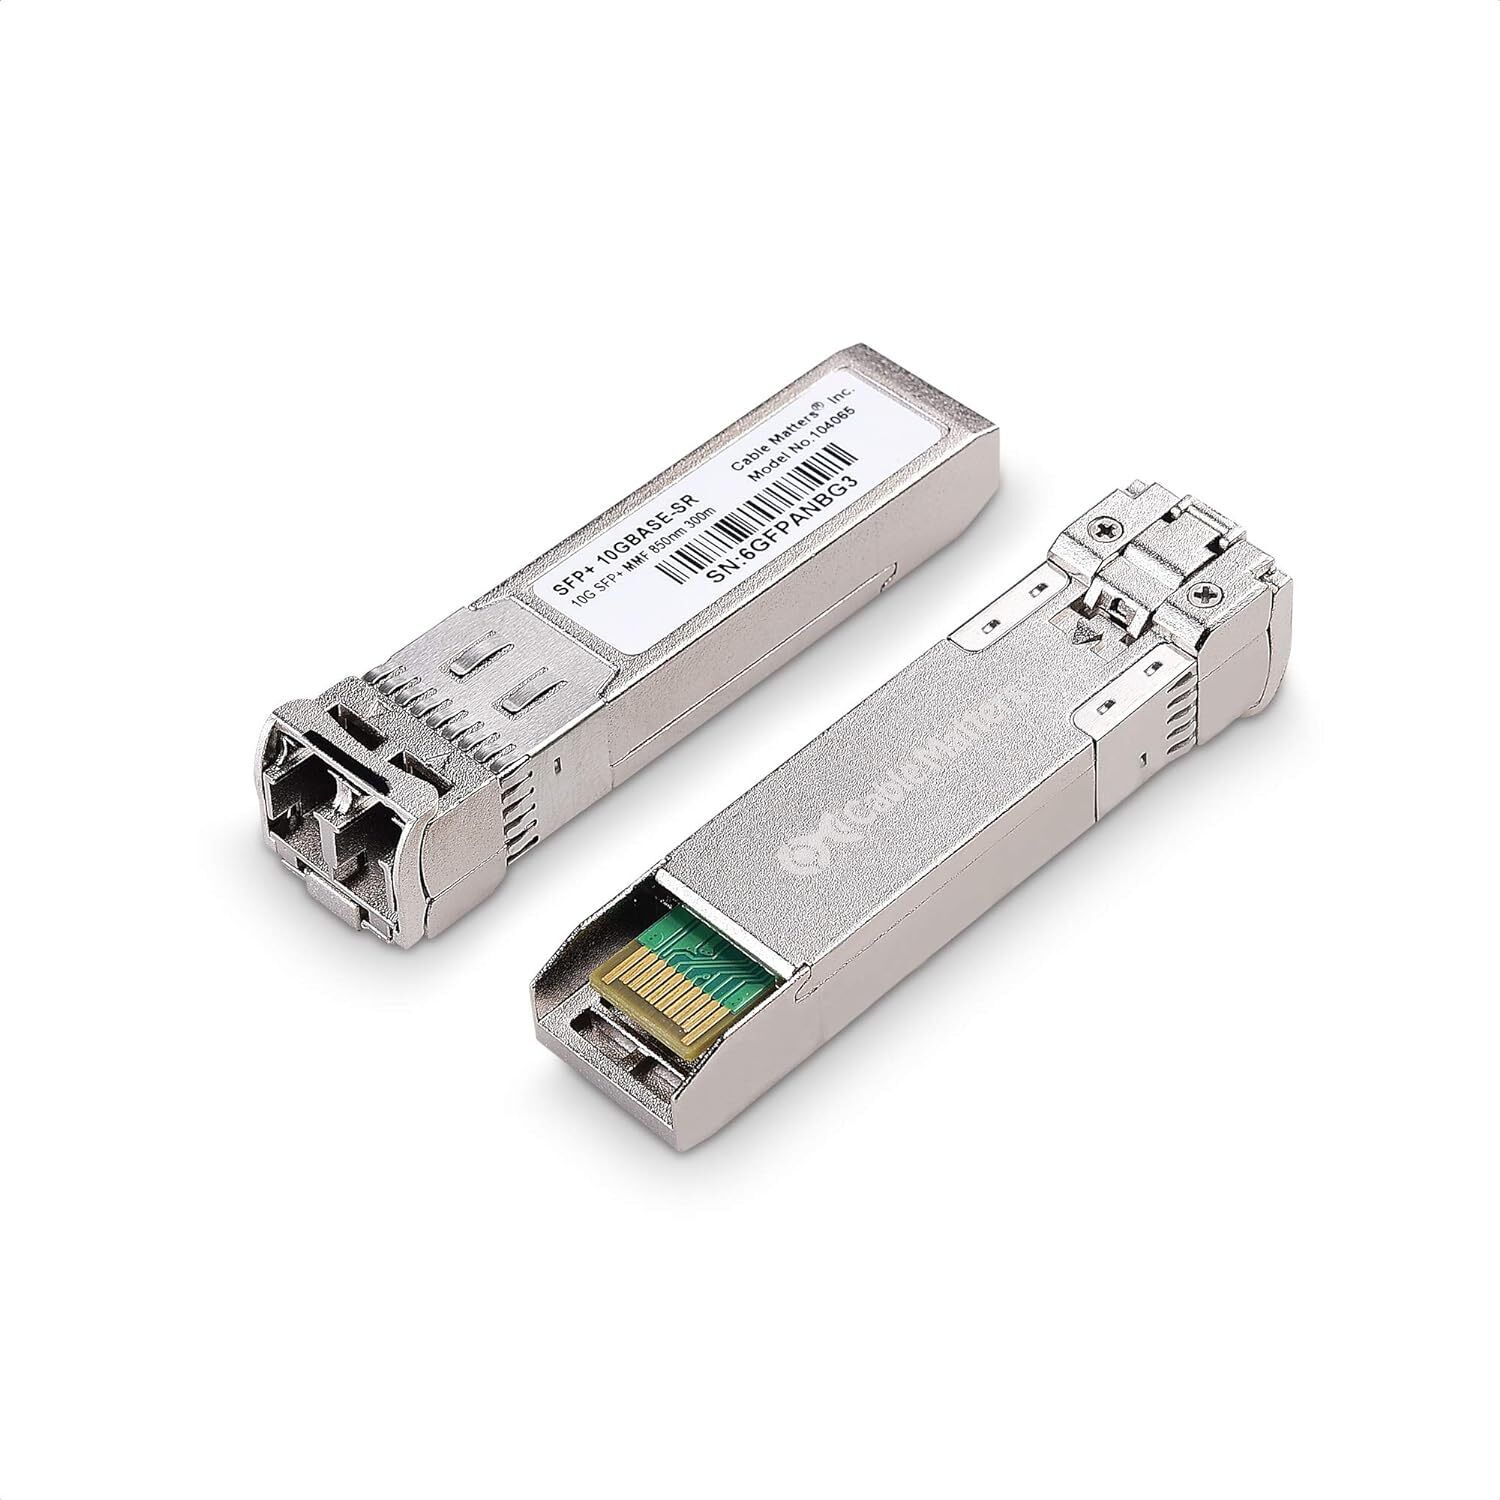 Cable Matters 2-Pack 10GBASE-SR SFP+ to LC Multi Mode 10G Fiber Transceiver Mo